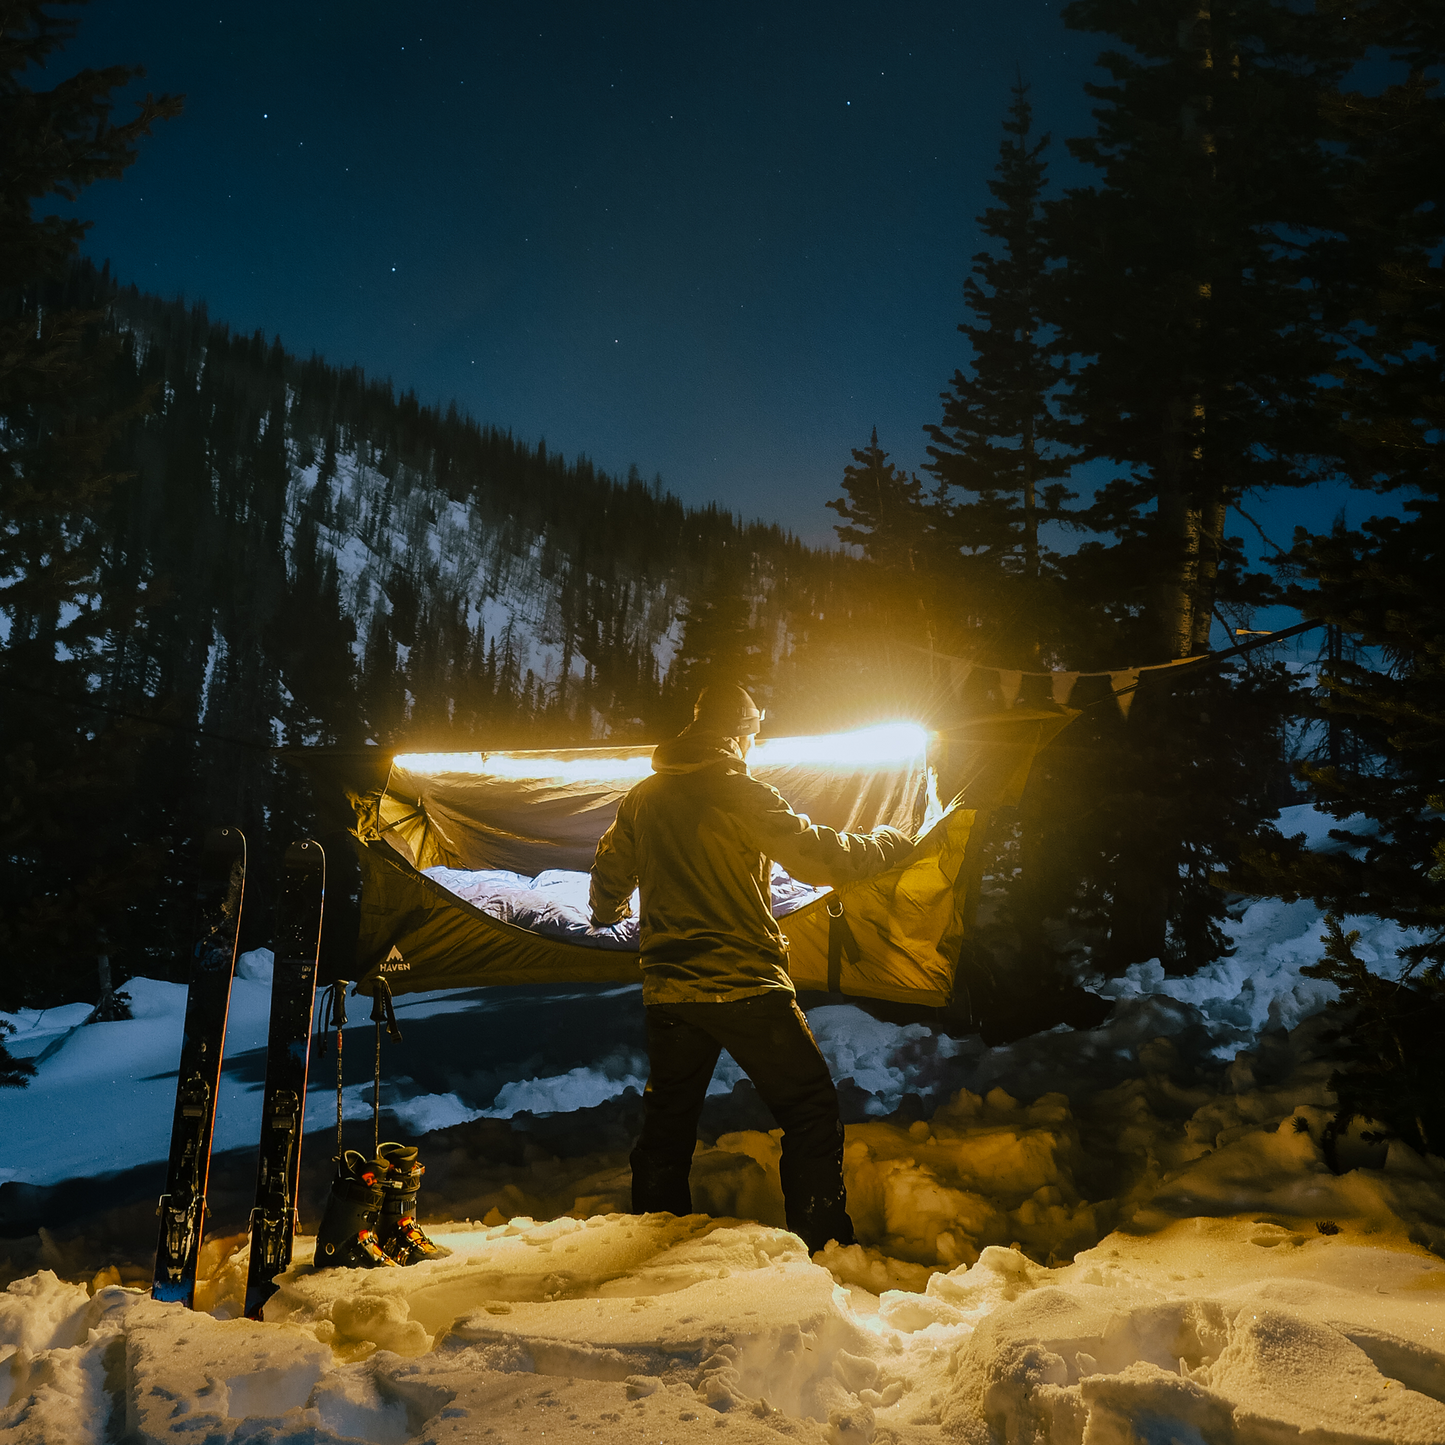 LED light string set up on camping hammock in the snow